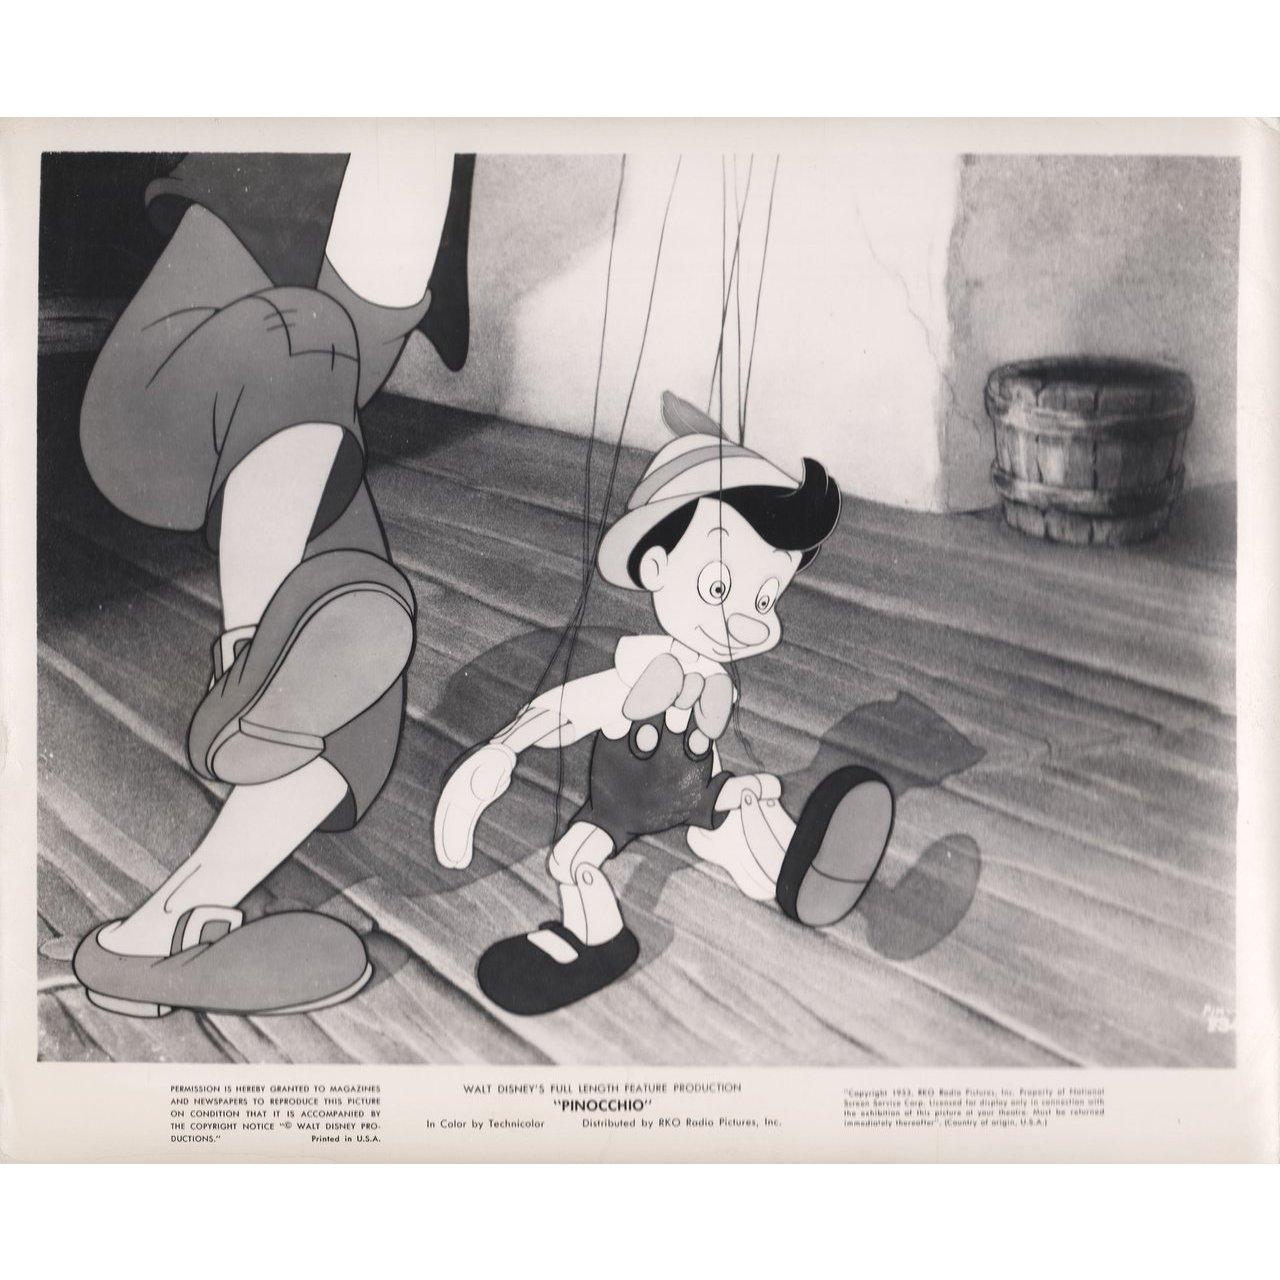 Original 1953 re-release U.S. silver gelatin single-weight photo for the 1940 film 'Pinocchio' directed by Norman Ferguson / T. Hee / Wilfred Jackson / Jack Kinney / Hamilton Luske / Bill Roberts / Ben Sharpsteen with Mel Blanc / Don Brodie / Walter